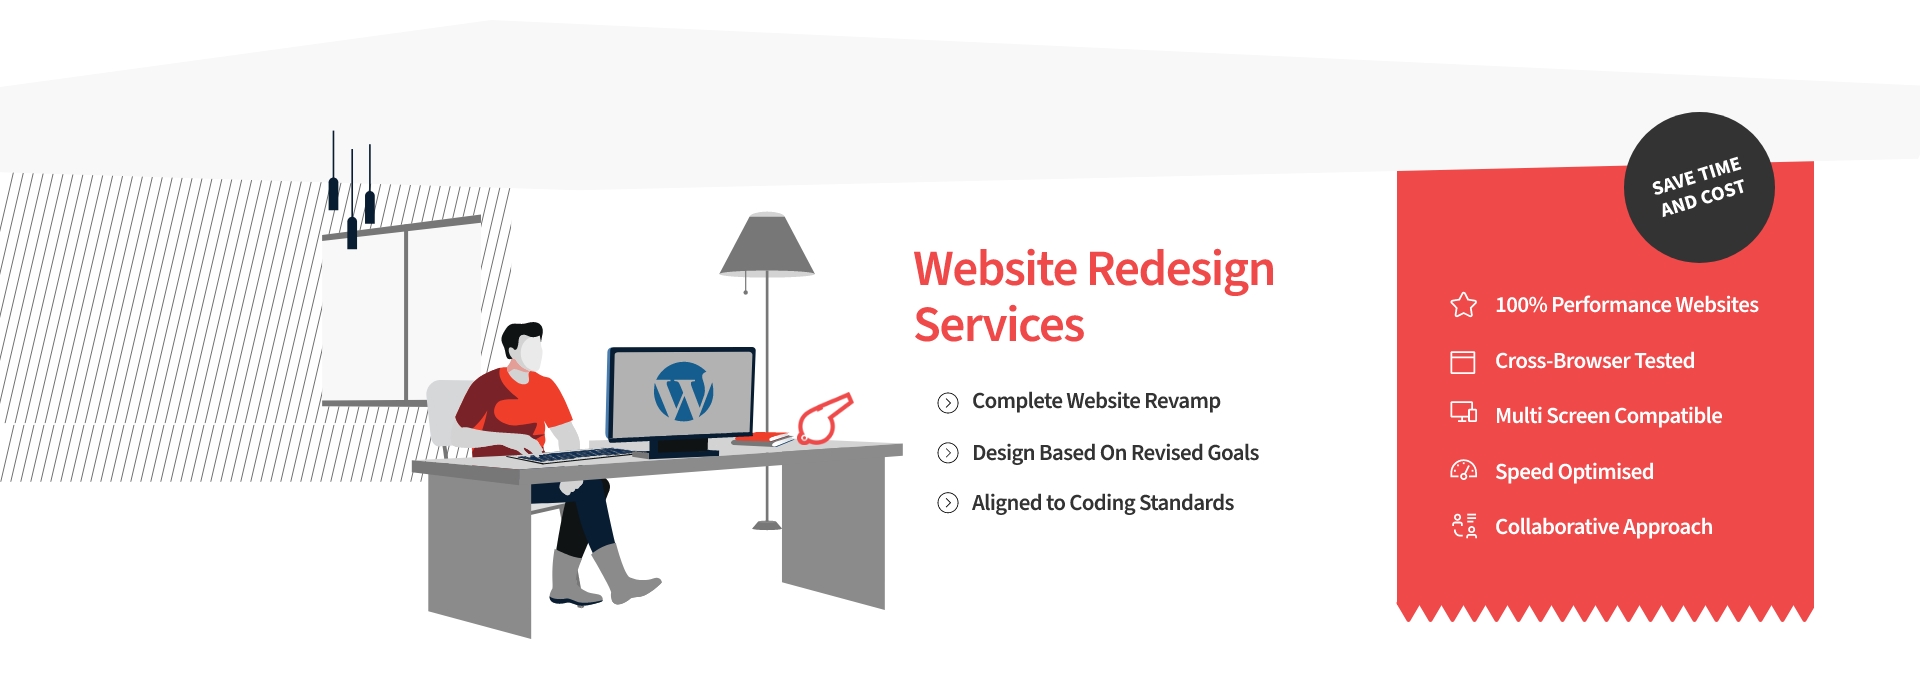 Website Redesign Services Agency - ColorWhistle